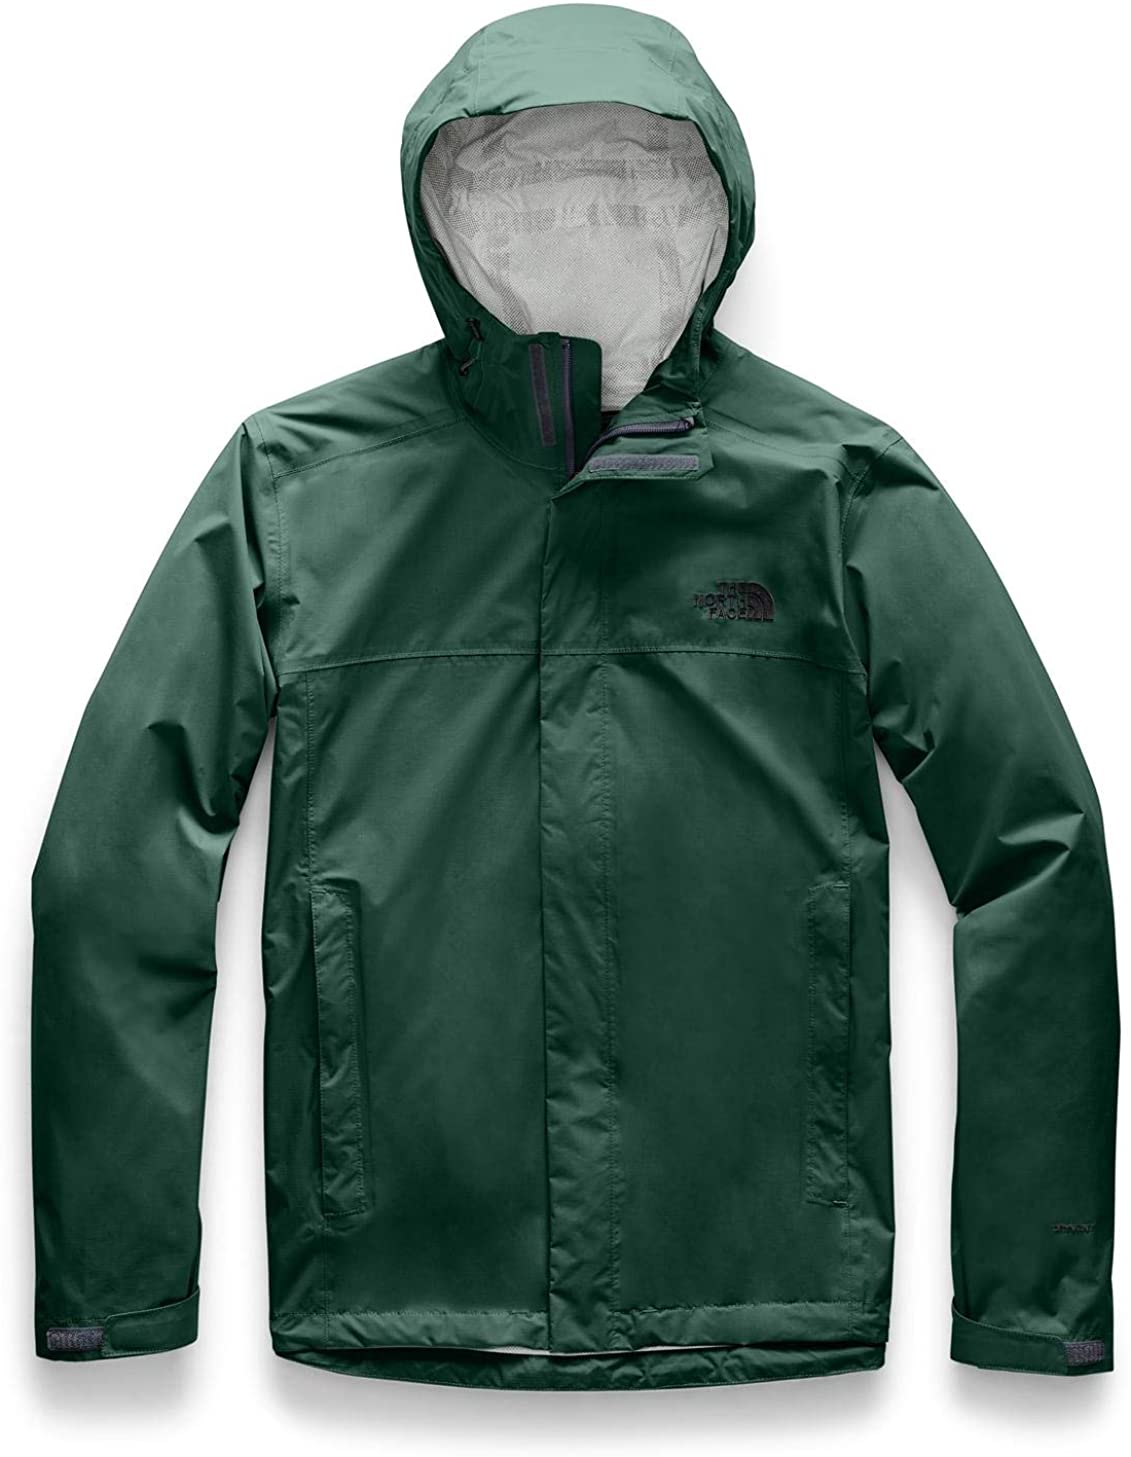 Men's The North Face Venture 2 Jacket in Night Green from the front